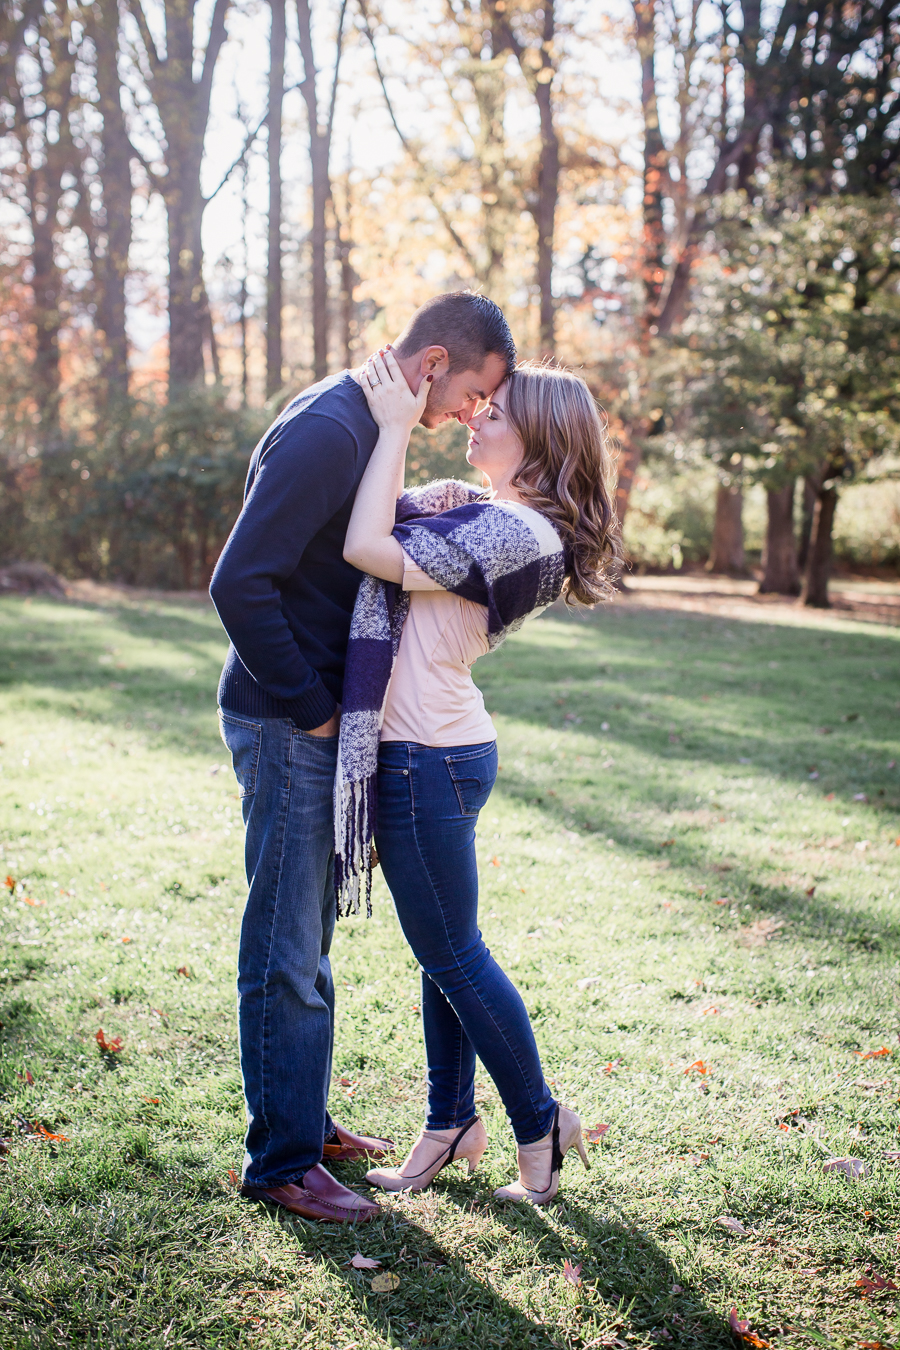 Her hands on his cheeks engagement photo by Knoxville Wedding Photographer, Amanda May Photos.